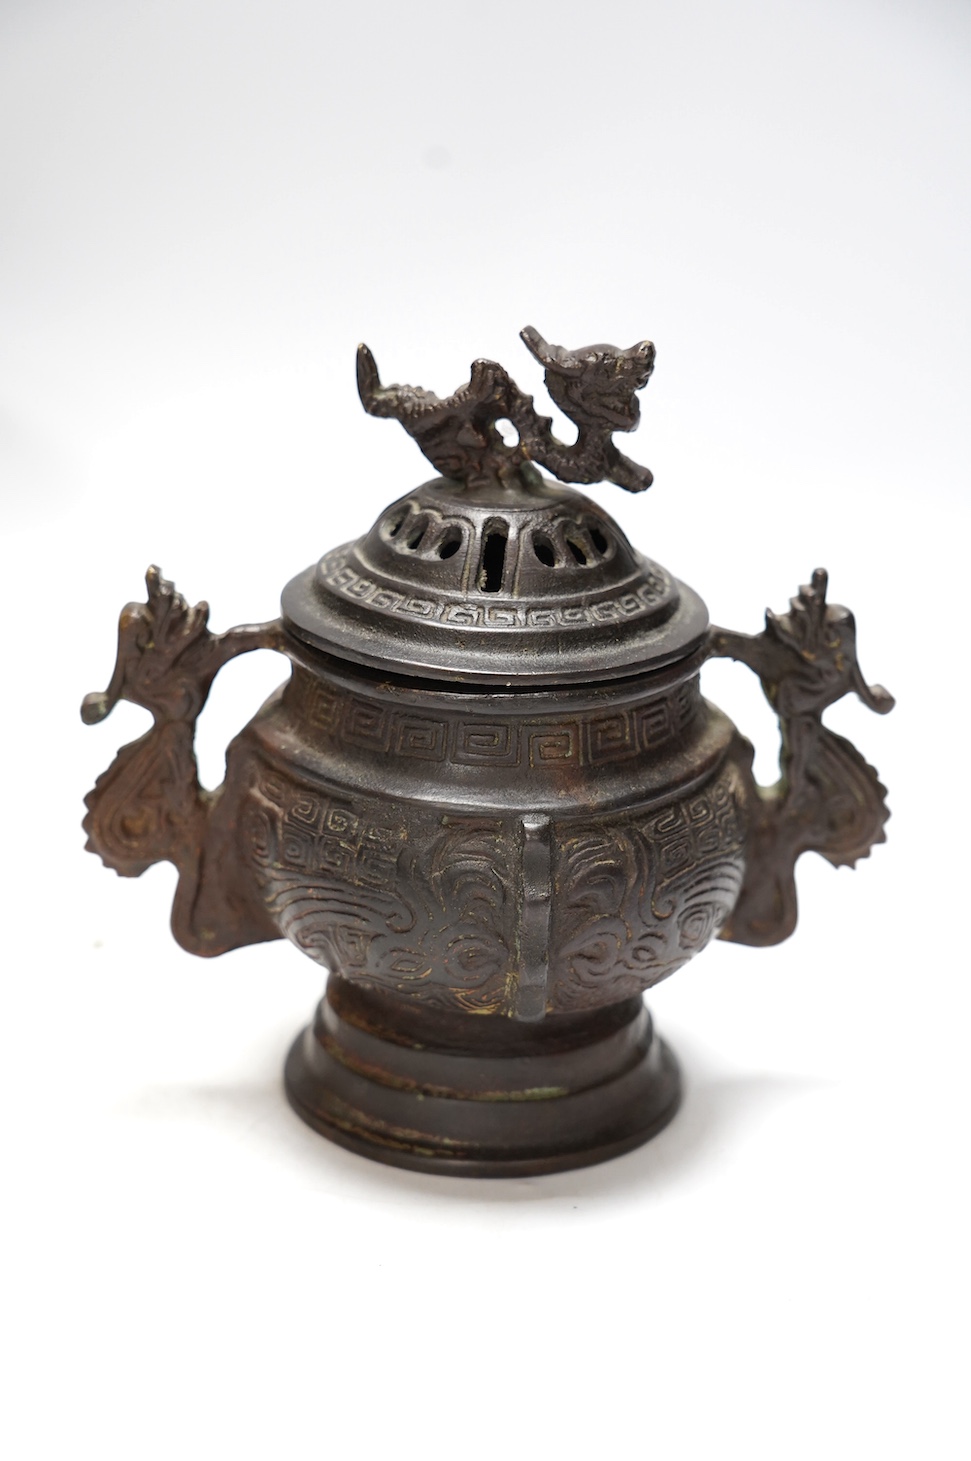 A Chinese bronze censer and cover, a Chinese bronze bowl and an Indian bronze seated deity, tallest 19cm high. Condition - fair some general scuffs and wear, the figure has a chip